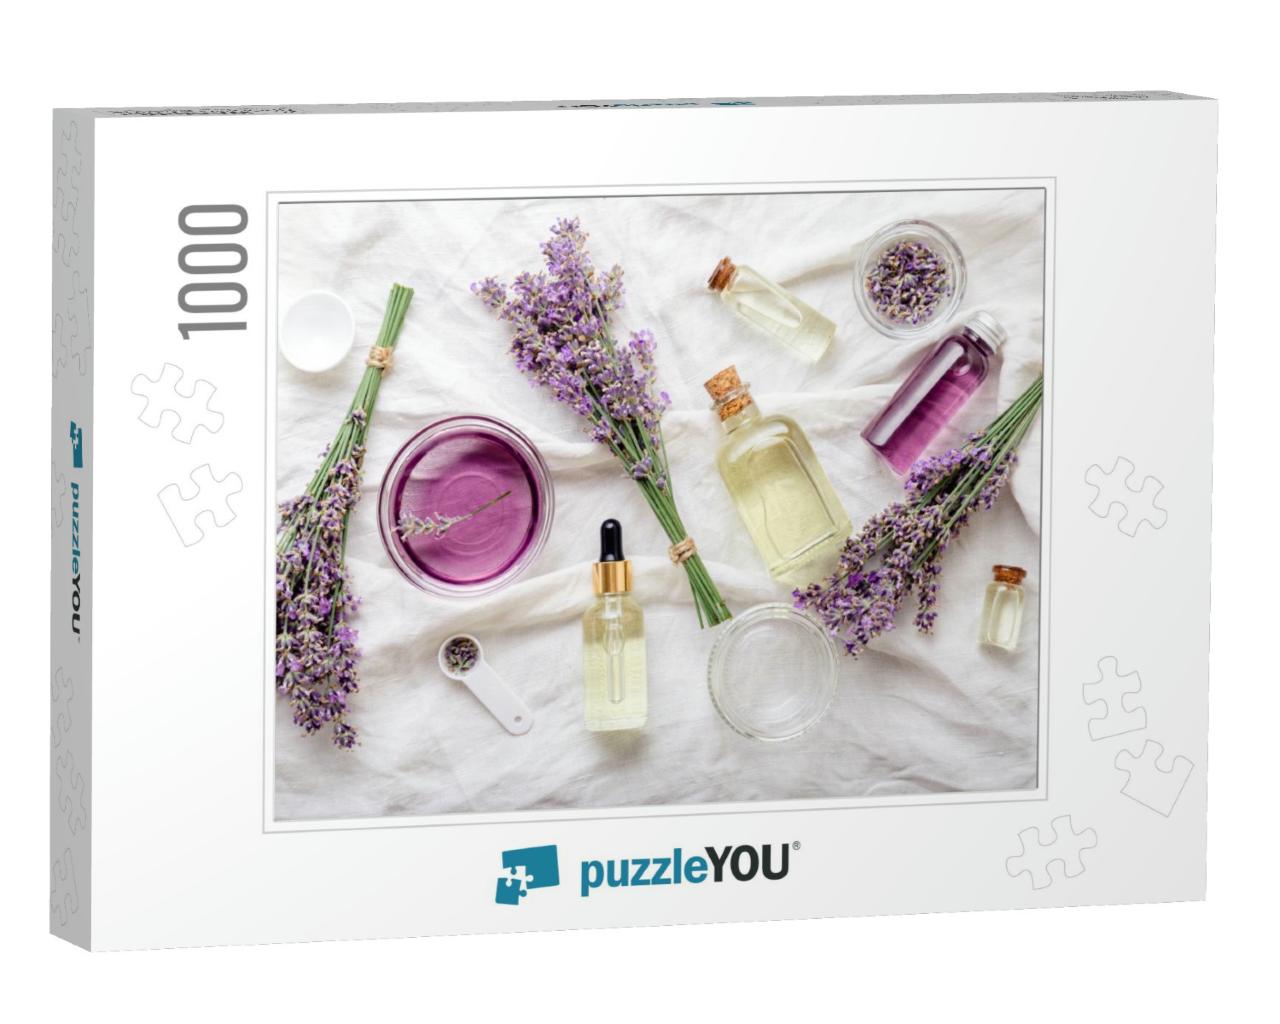 Lavender Oils Serum & Lavender Flowers on White Fabric. S... Jigsaw Puzzle with 1000 pieces